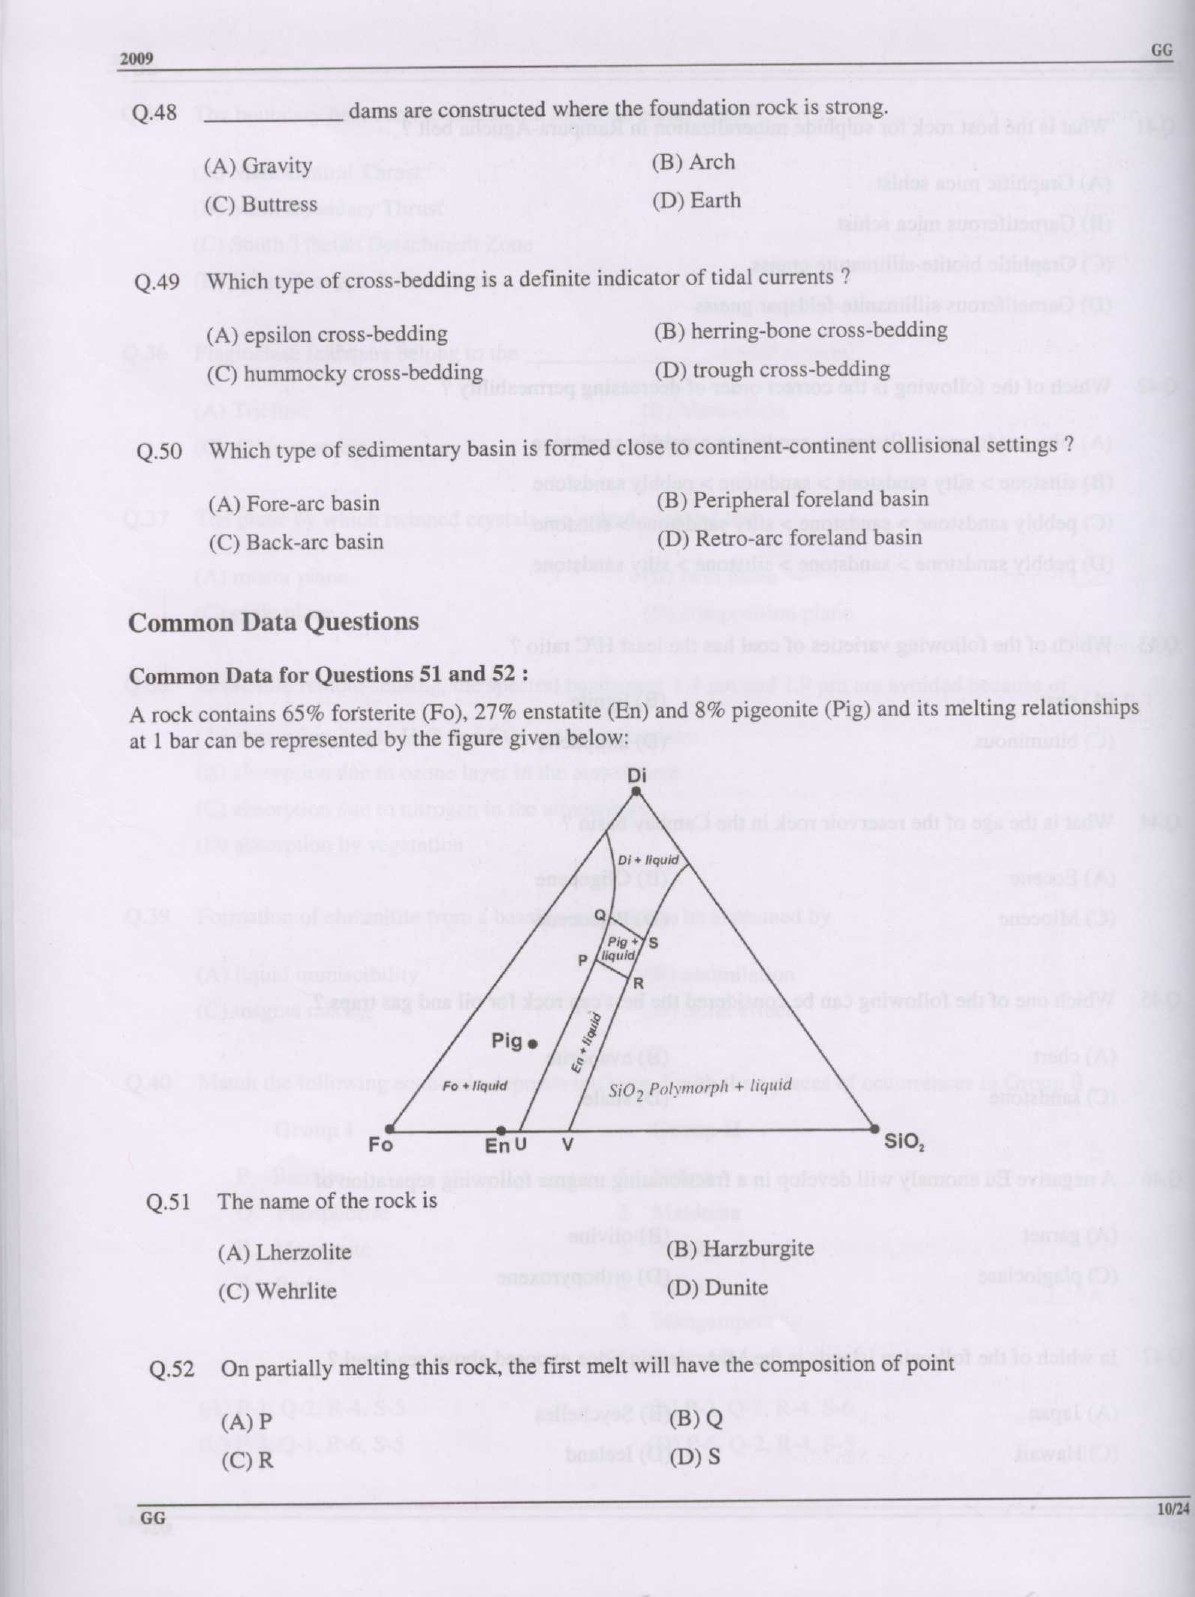 GATE Exam Question Paper 2009 Geology and Geophysics 10